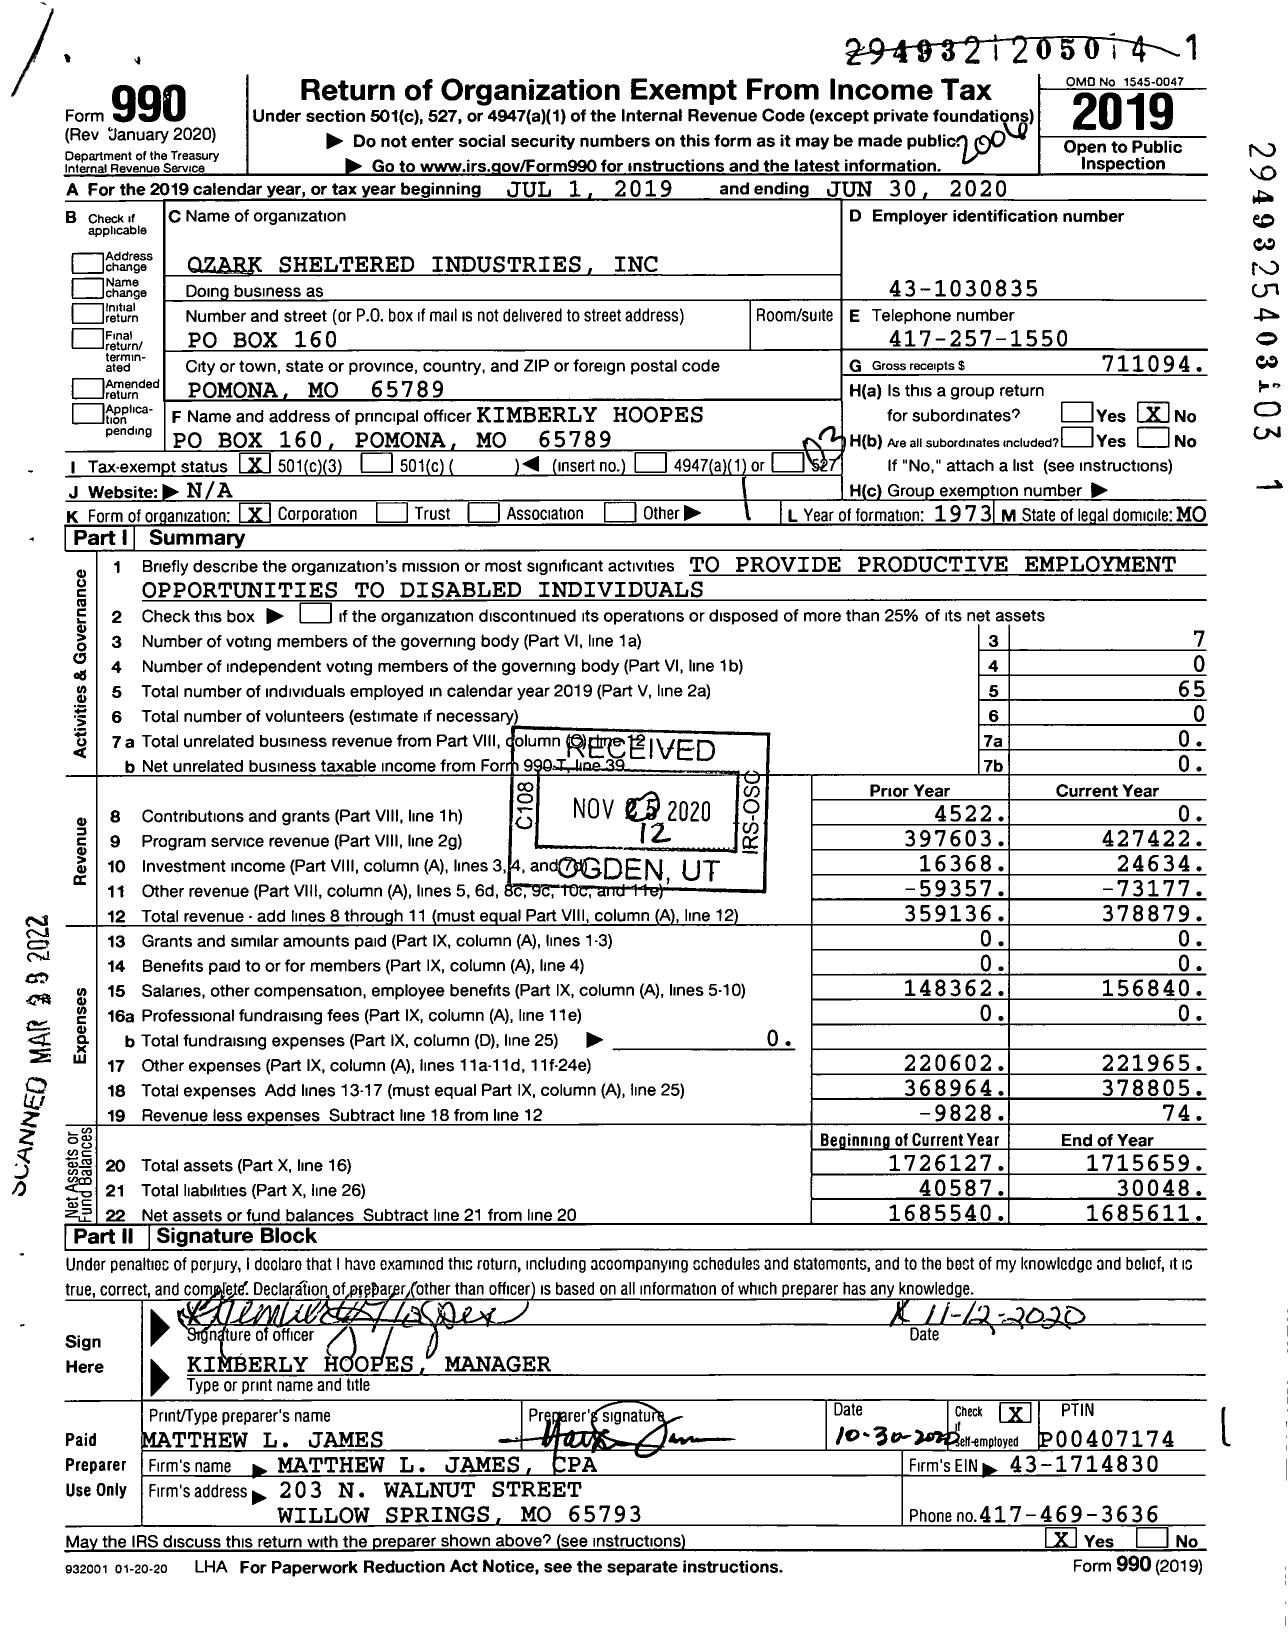 Image of first page of 2019 Form 990 for Ozark Sheltered Industries